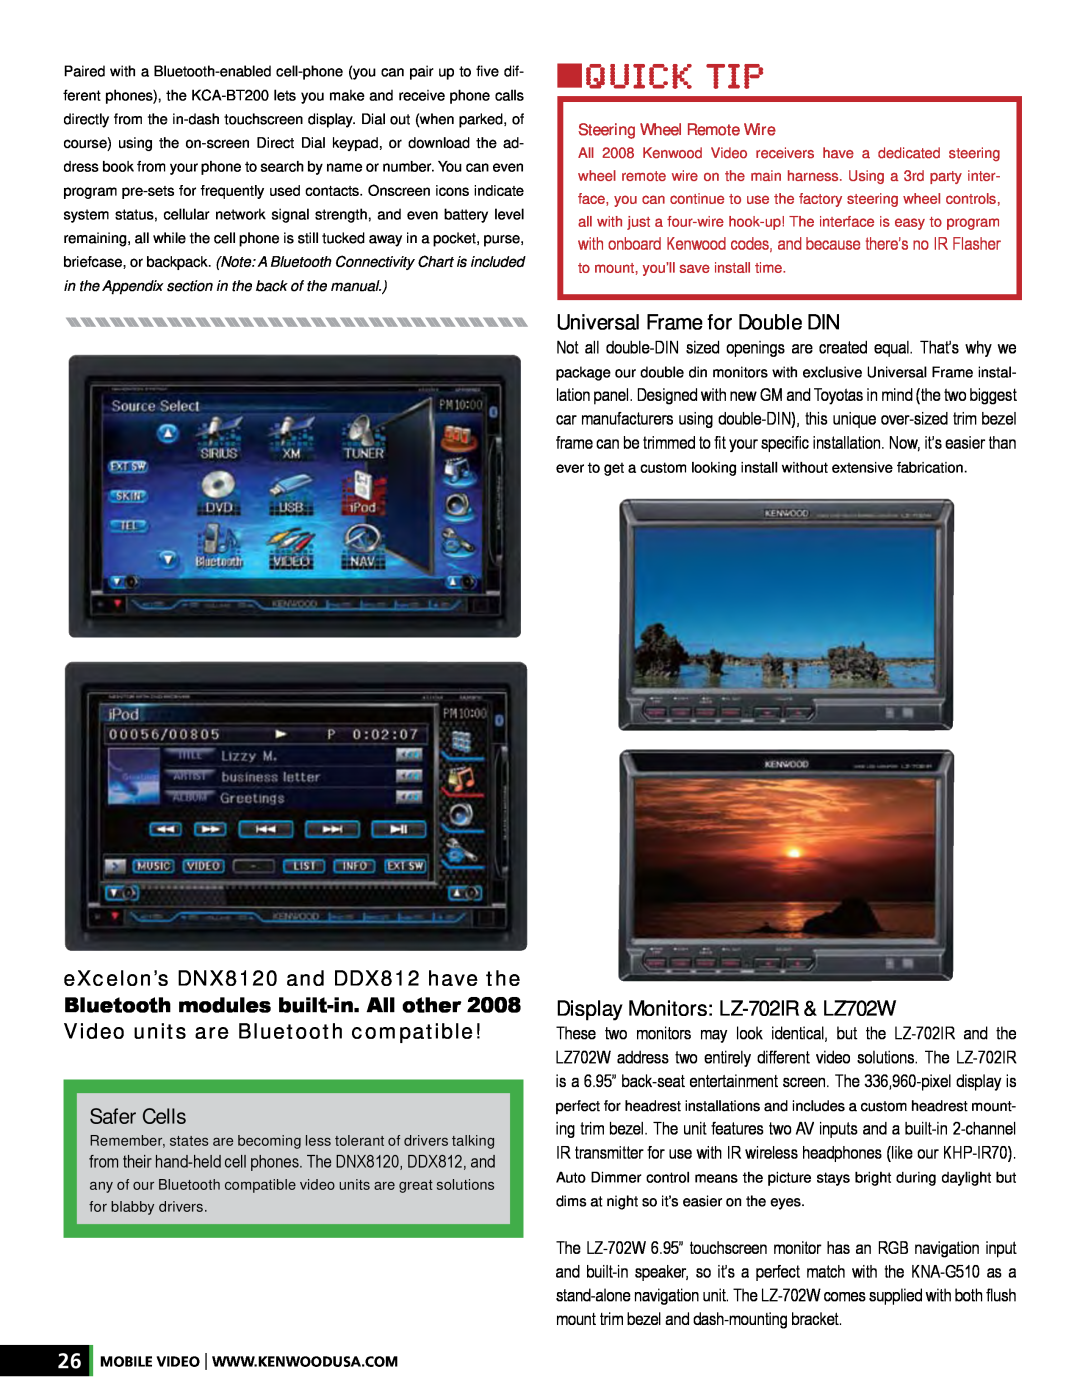 Kenwood XR-S17P manual Safer Cells, Universal Frame for Double DIN, Display Monitors: LZ-702IR& LZ702W 